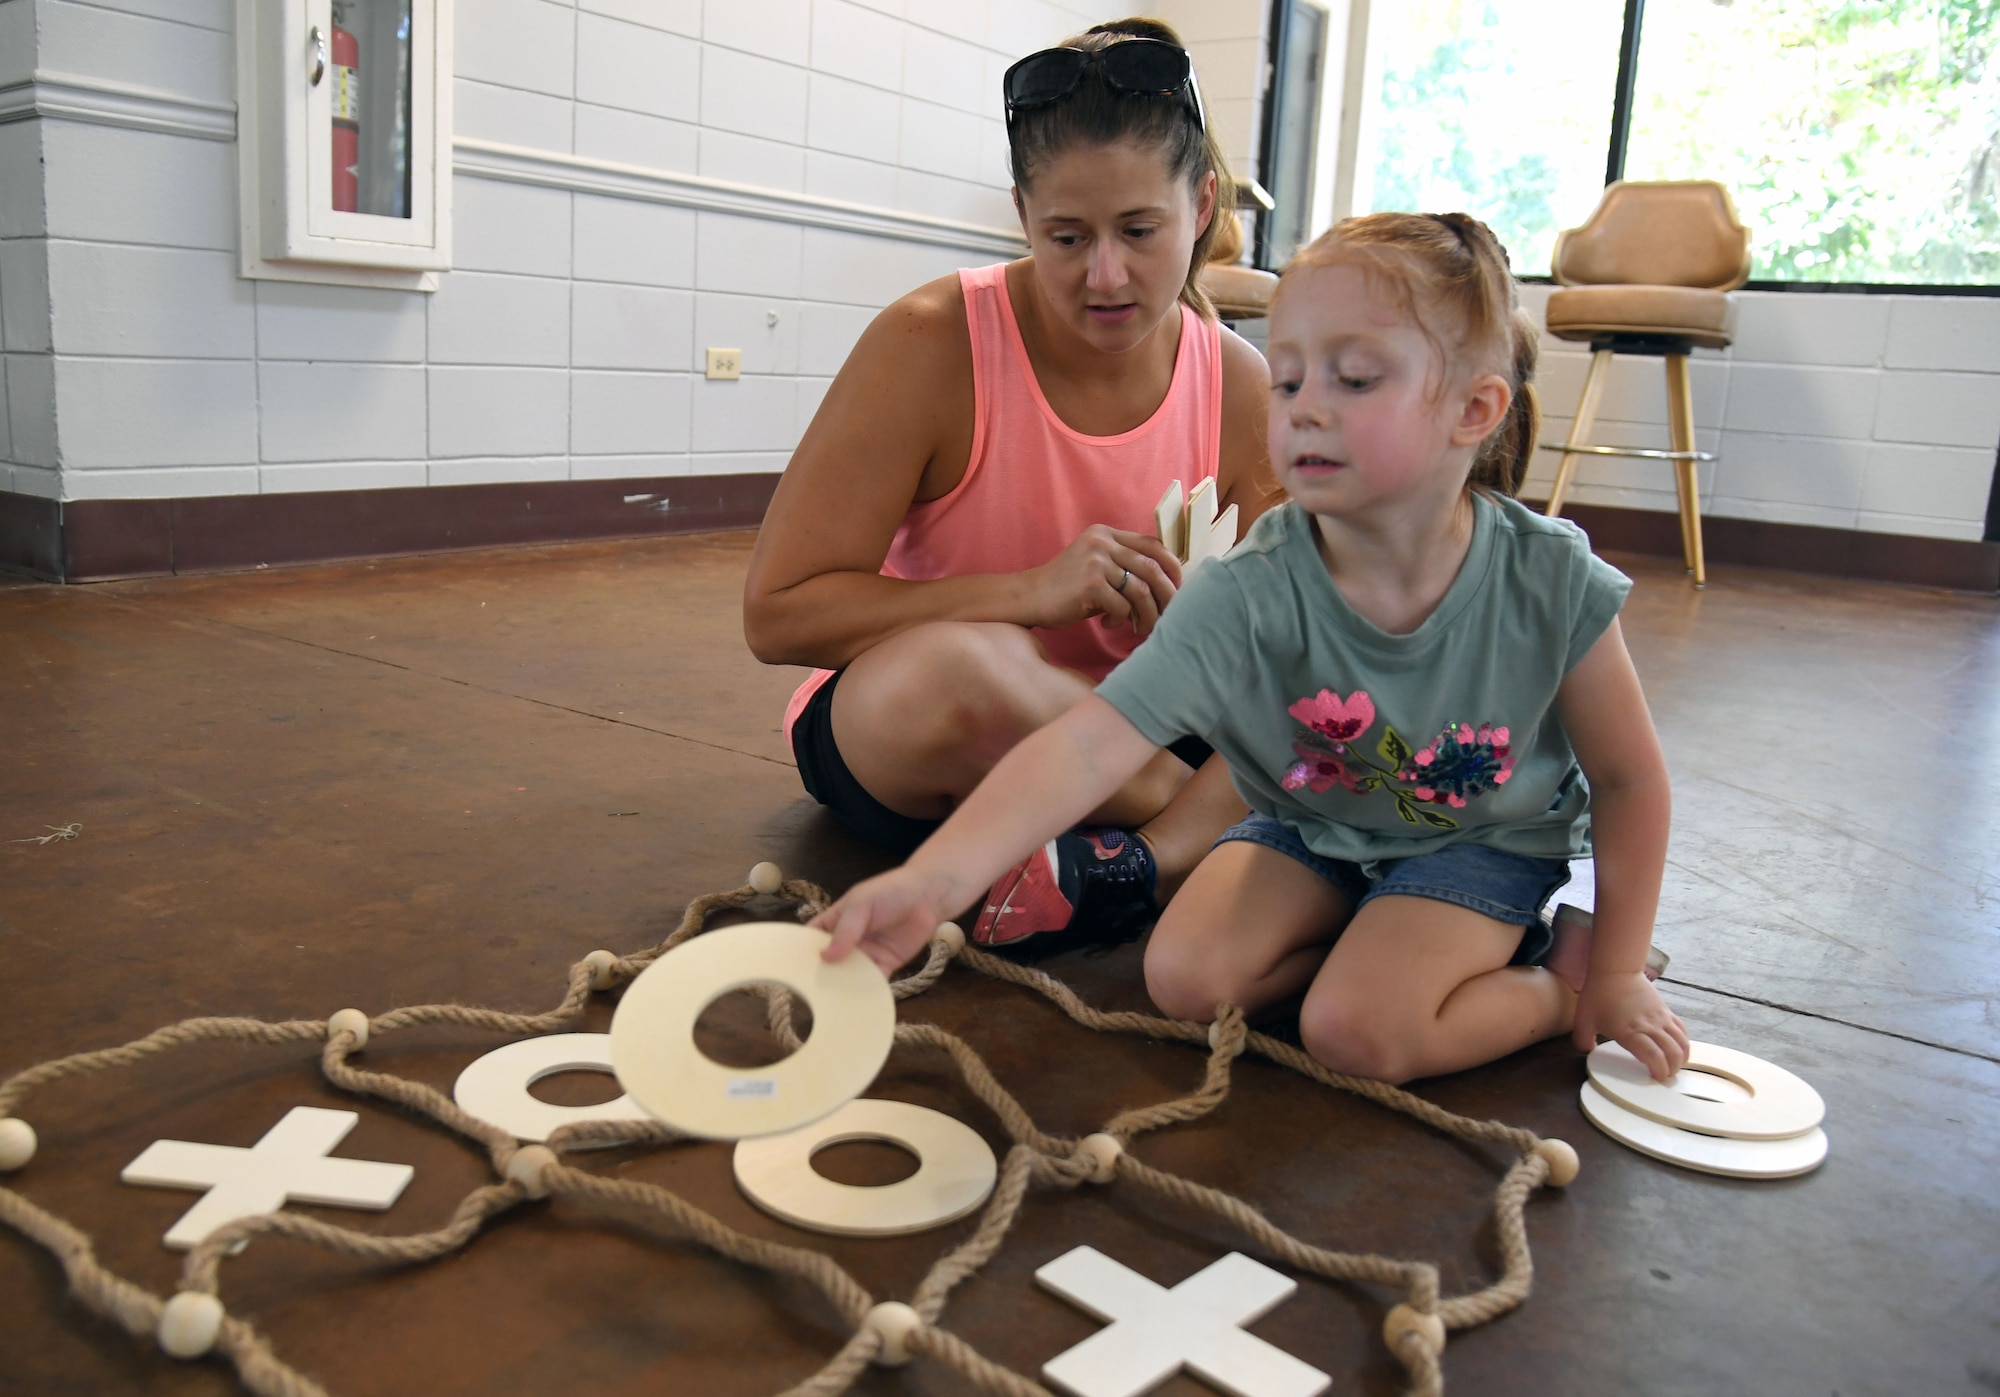 Jennifer Dykes, wife of U.S. Air Force Lt. Col. Barrington Dykes, 81st Dental Squadron orthodontist, and their daughter, Norah, play a game of tic-tac-toe during a Back to School Bash at the Keesler Marina on Keesler Air Force Base, Mississippi, July 28, 2022. The bash, a collaboration of agencies that included Operation Homefront, the Back-to-School Brigade and Keesler support agencies, provided families with nearly 200 bookbags filled with supplies and included games and free snow cones. (U.S. Air Force photo by Kemberly Groue)